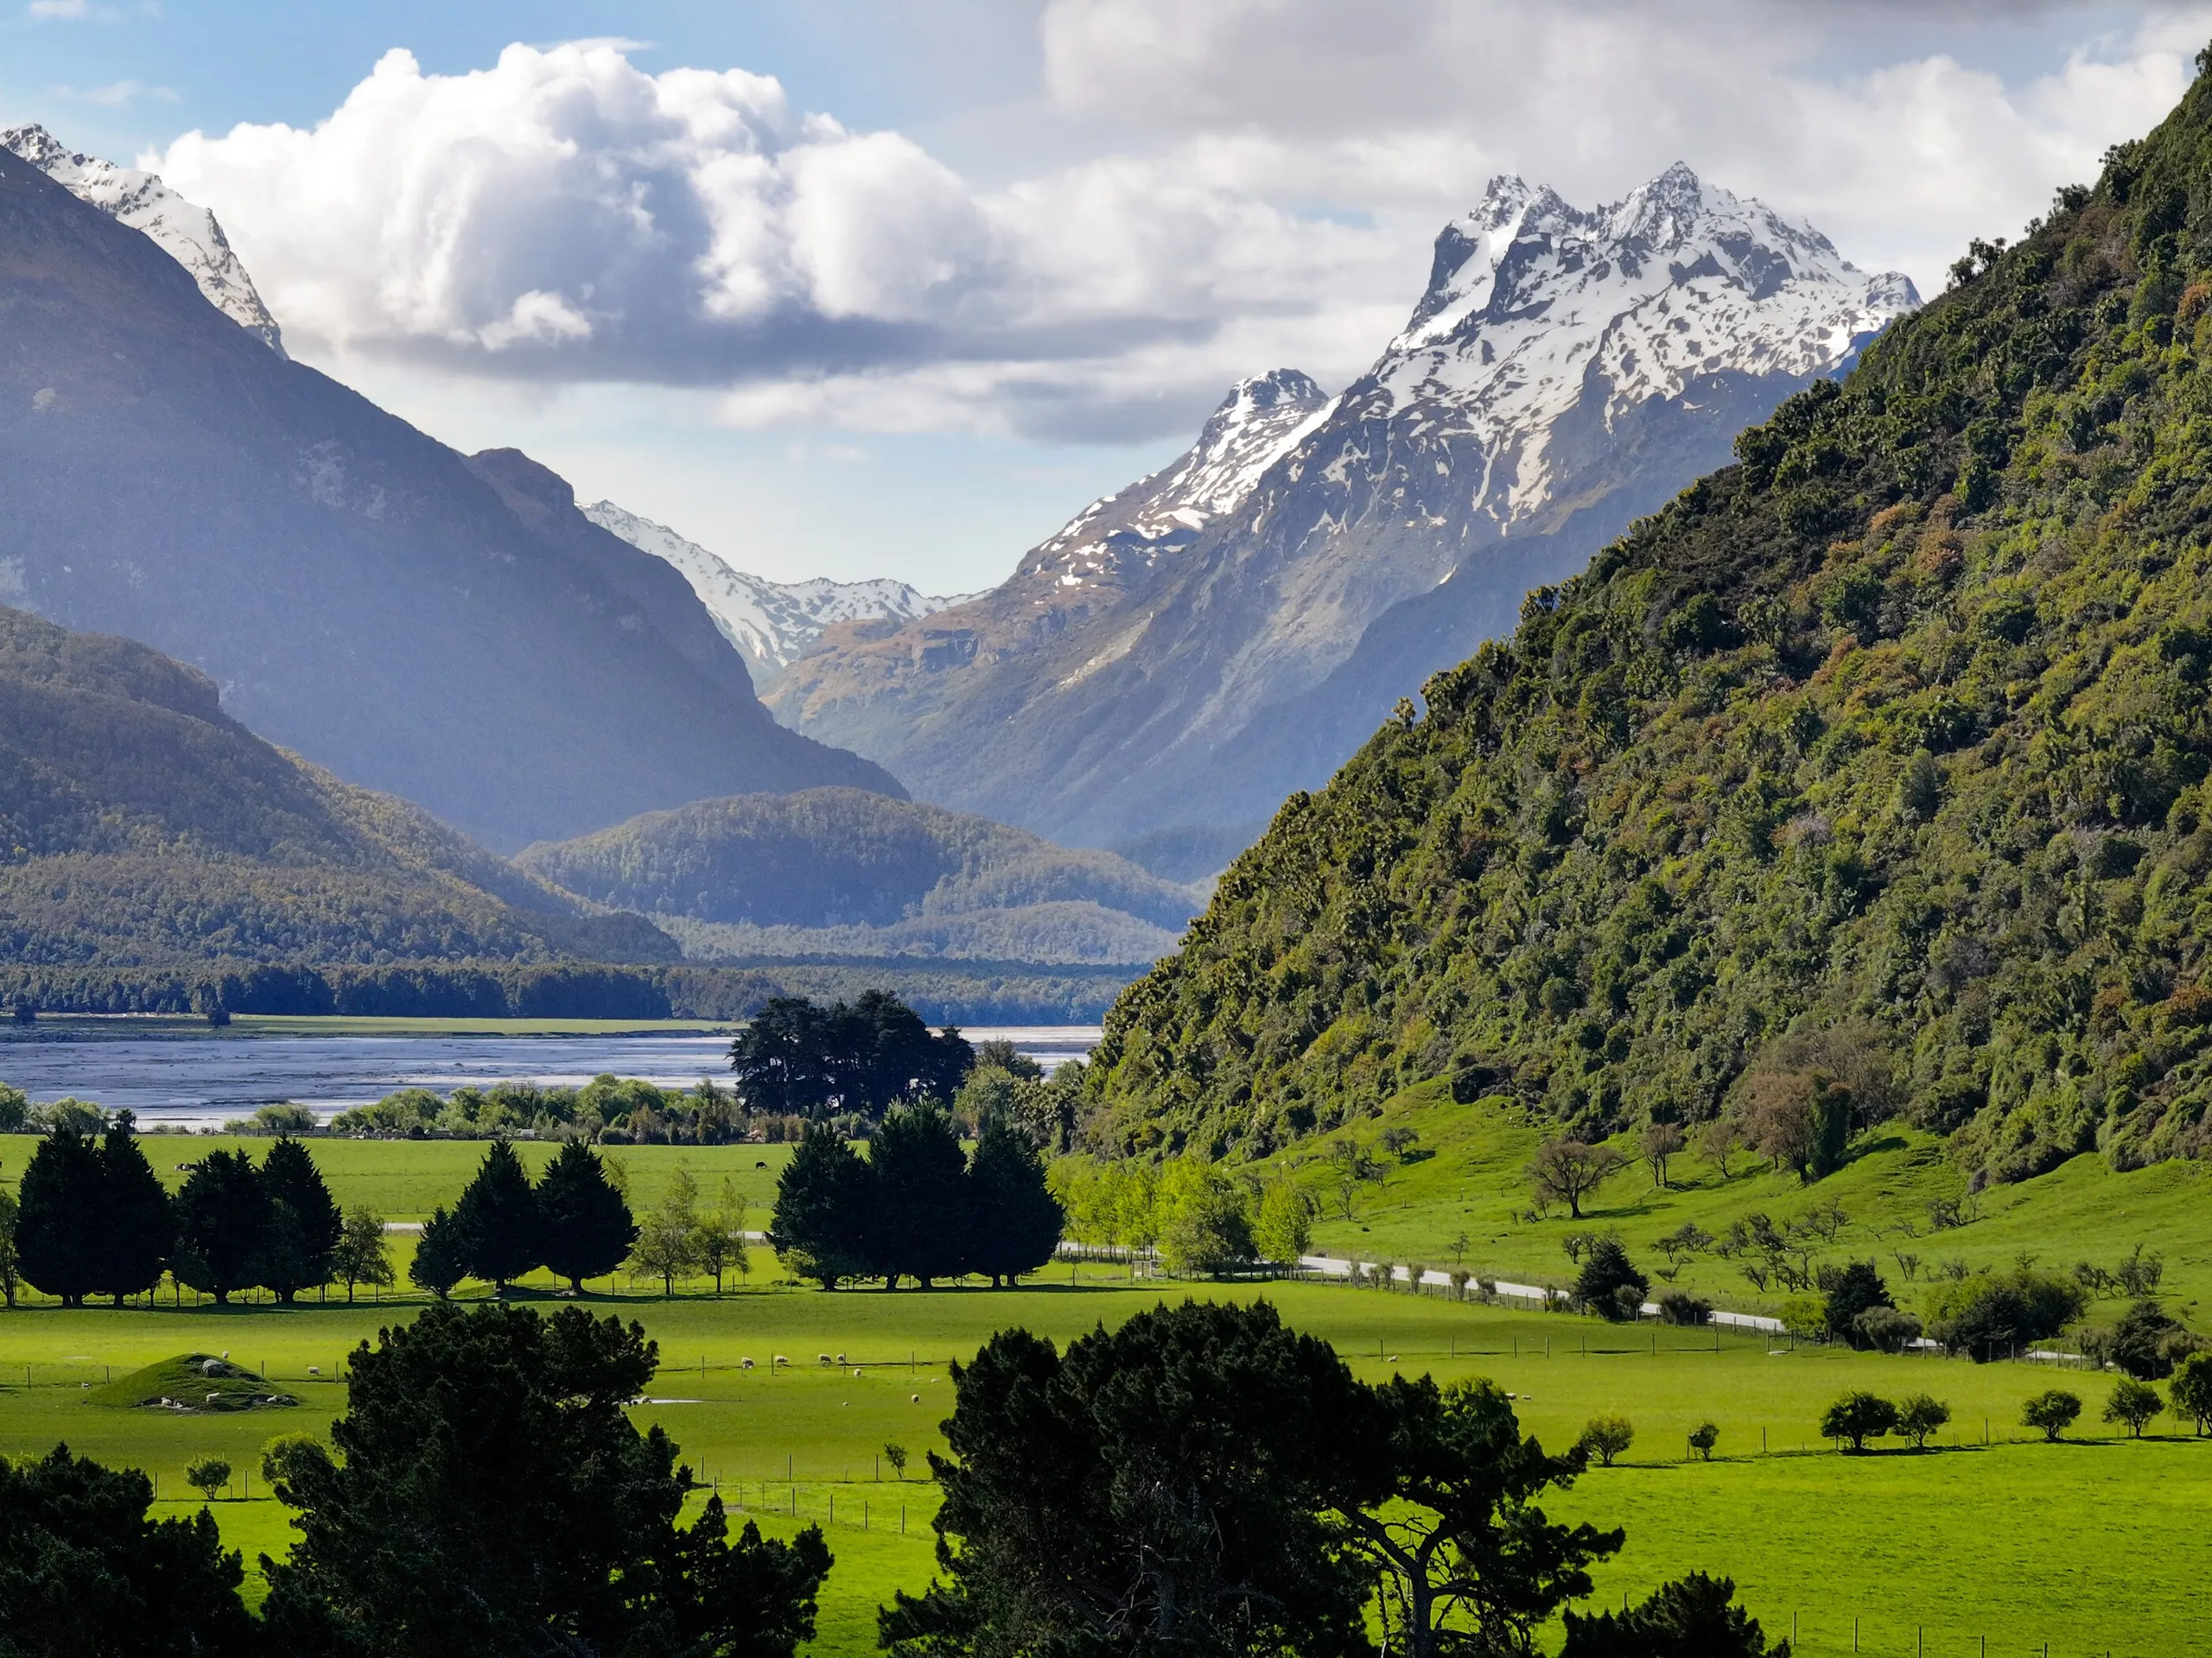 Priory Farm Block, Glenorchy-Routeburn Road, Glenorchy, Queenstown